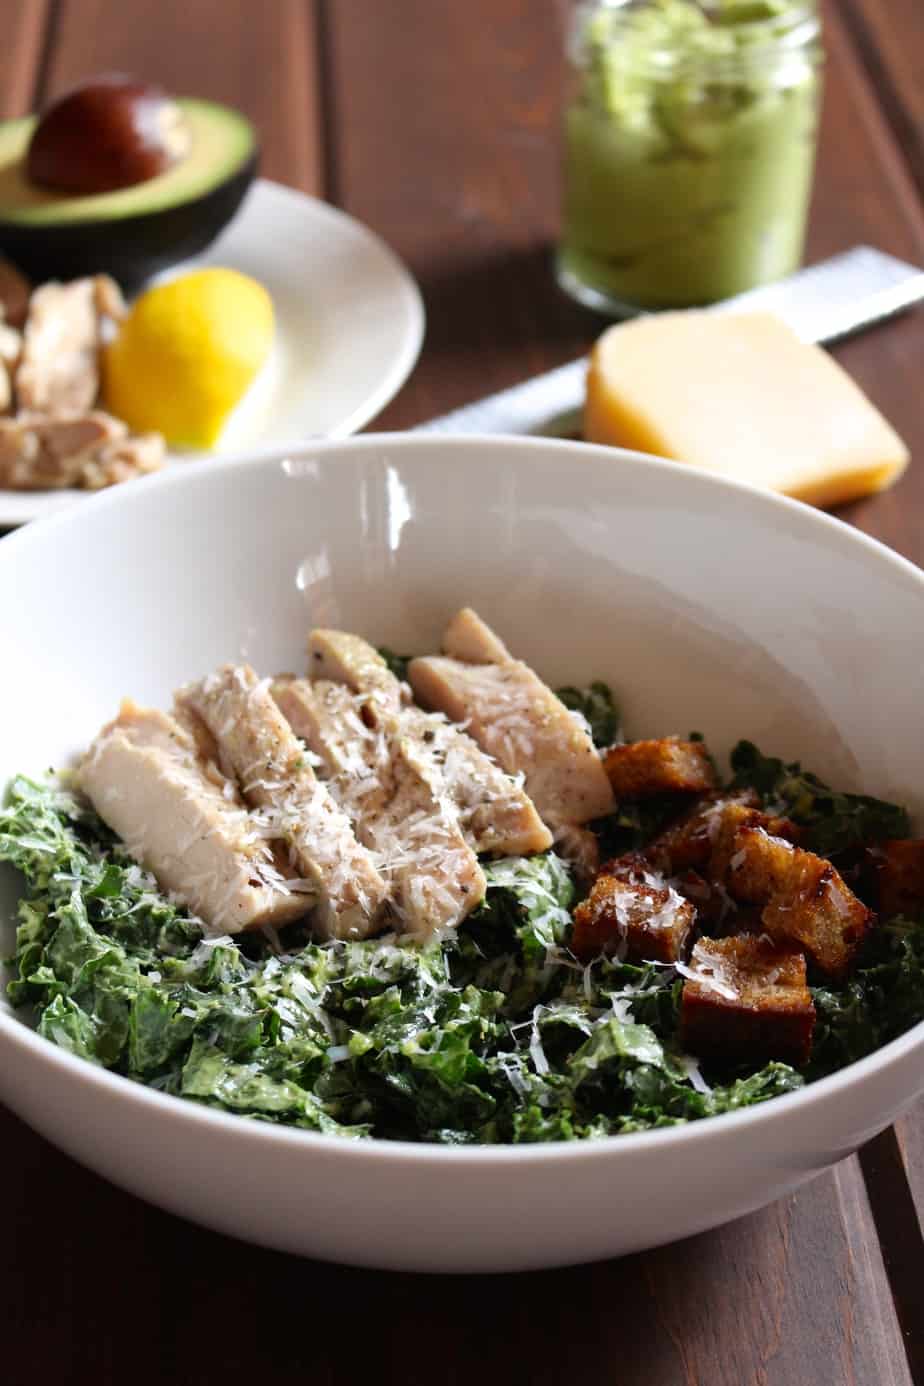 Chicken Kale Salad with Avocado Caesar and Homemade Croutons | Frugal Nutrition